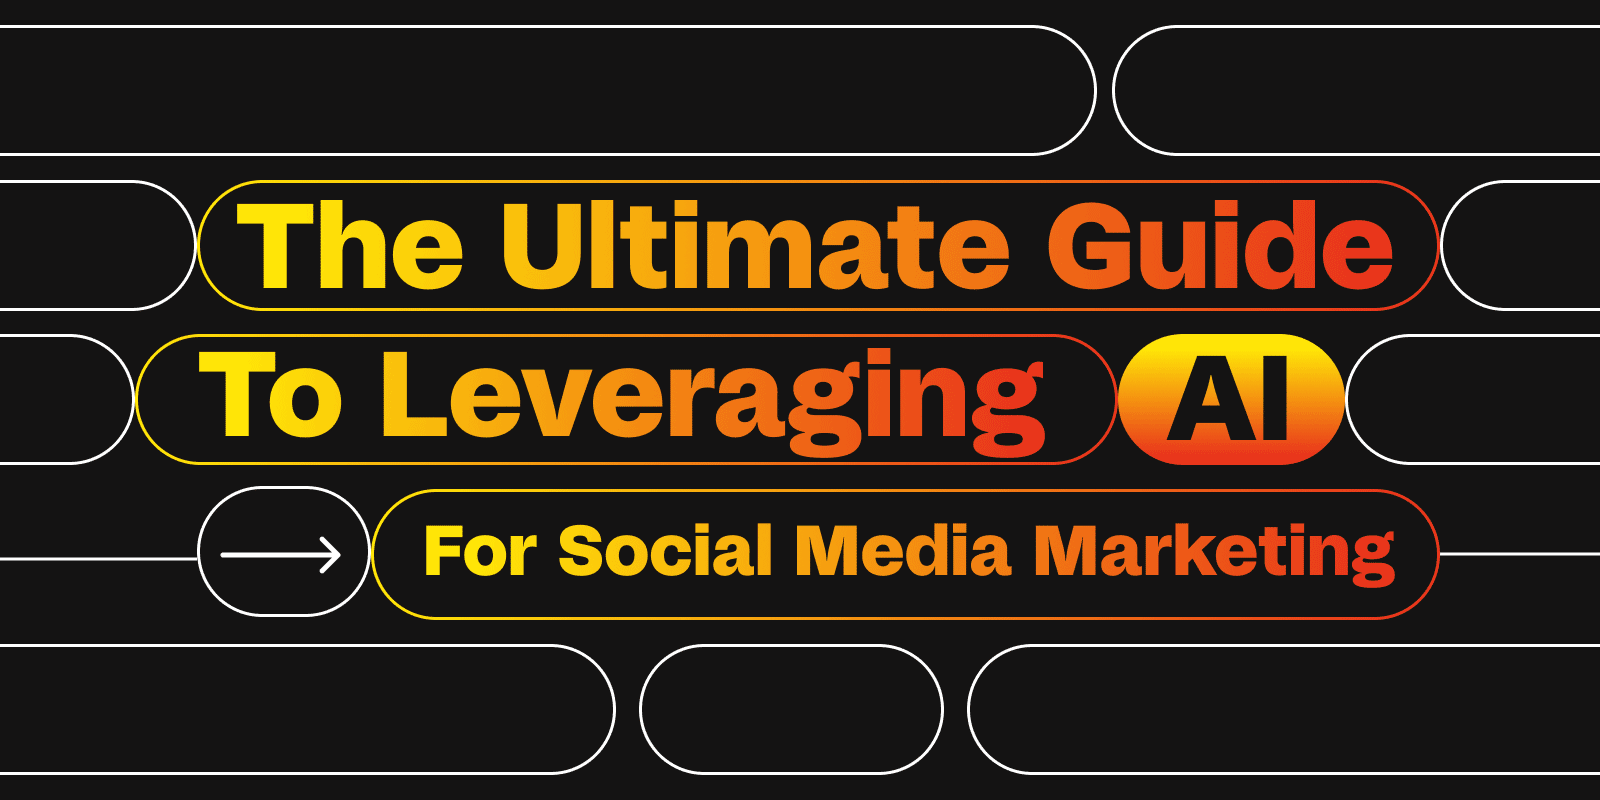 The Ultimate Guide to Leveraging AI for Social Media Marketing